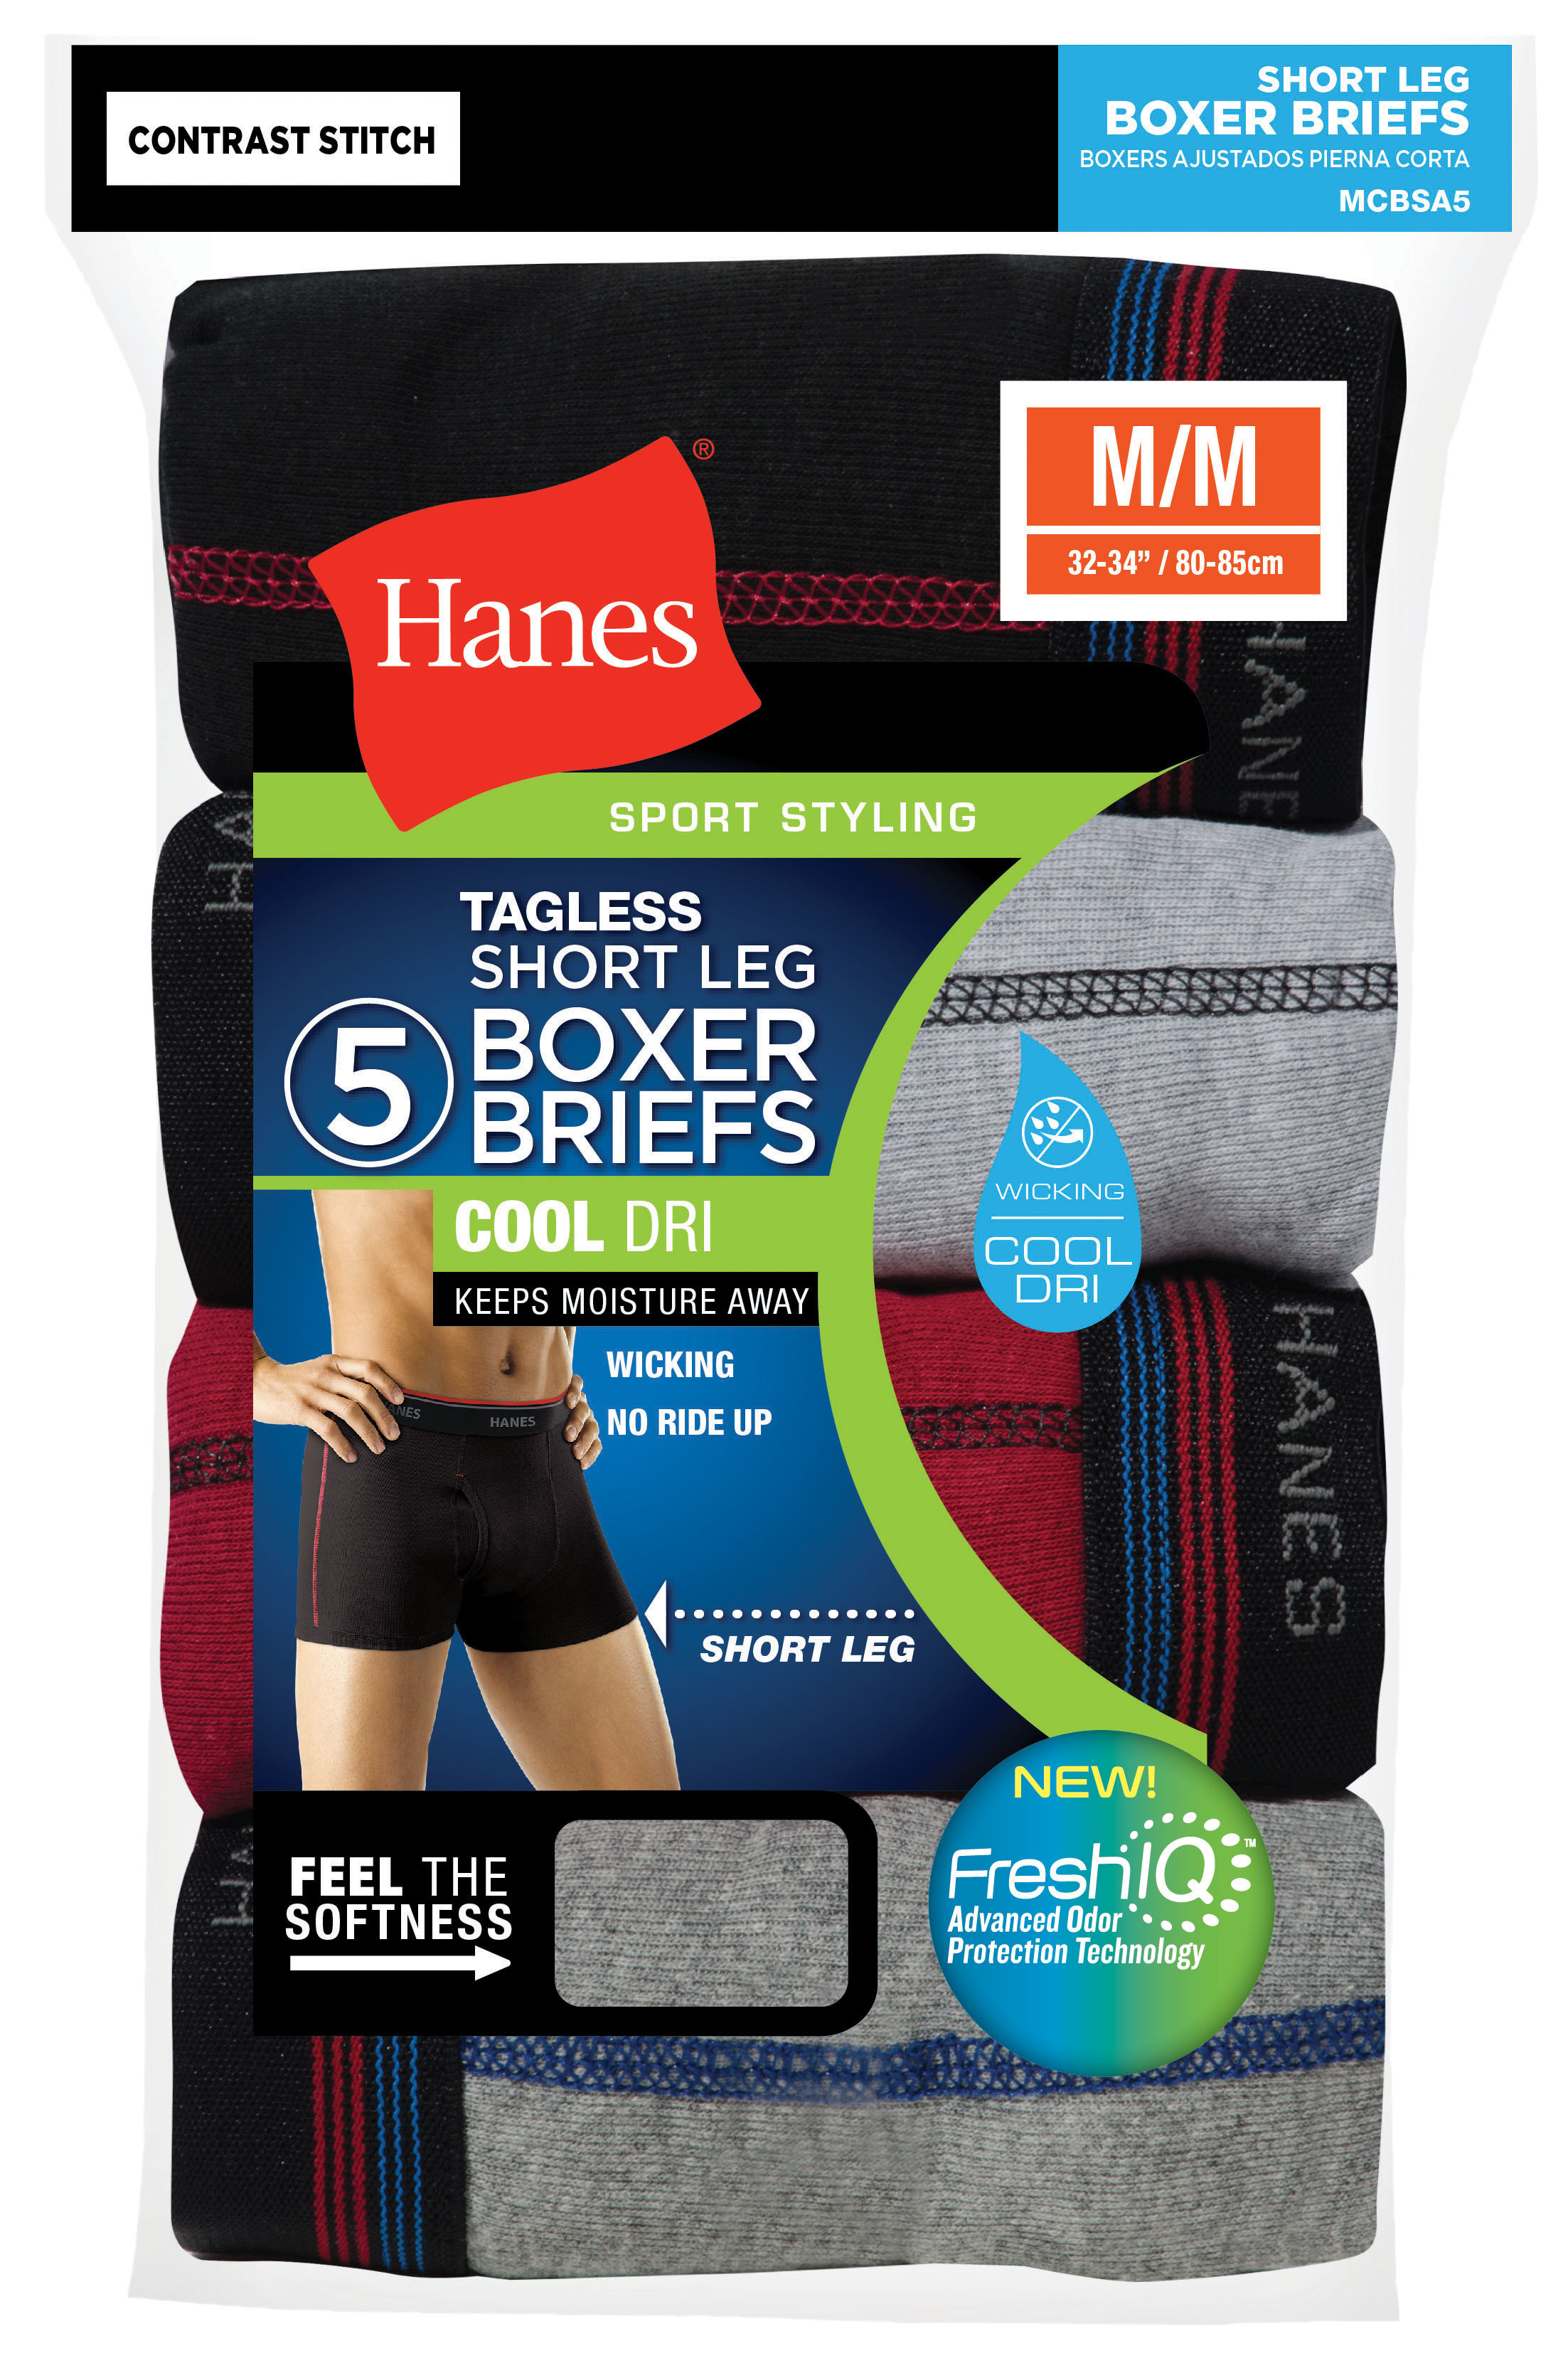 Hanes Introduces FreshIQ Technology Innovation across Men's Apparel Basics  to Drive Organic Growth, 'End the Smellfie